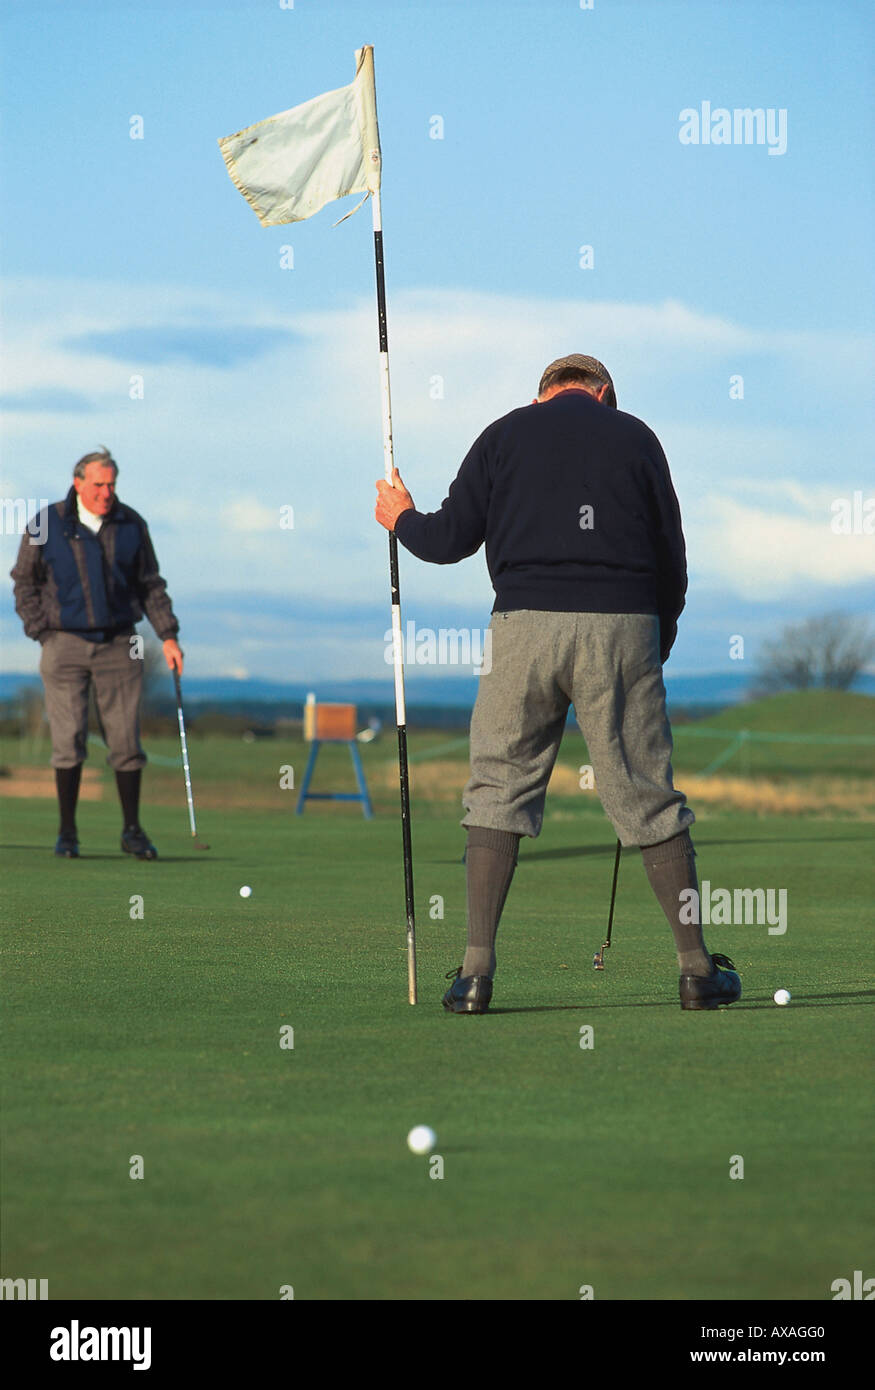 Two men playing golf, St. Andrews, Scotland, Great Britain, Europe Stock Photo